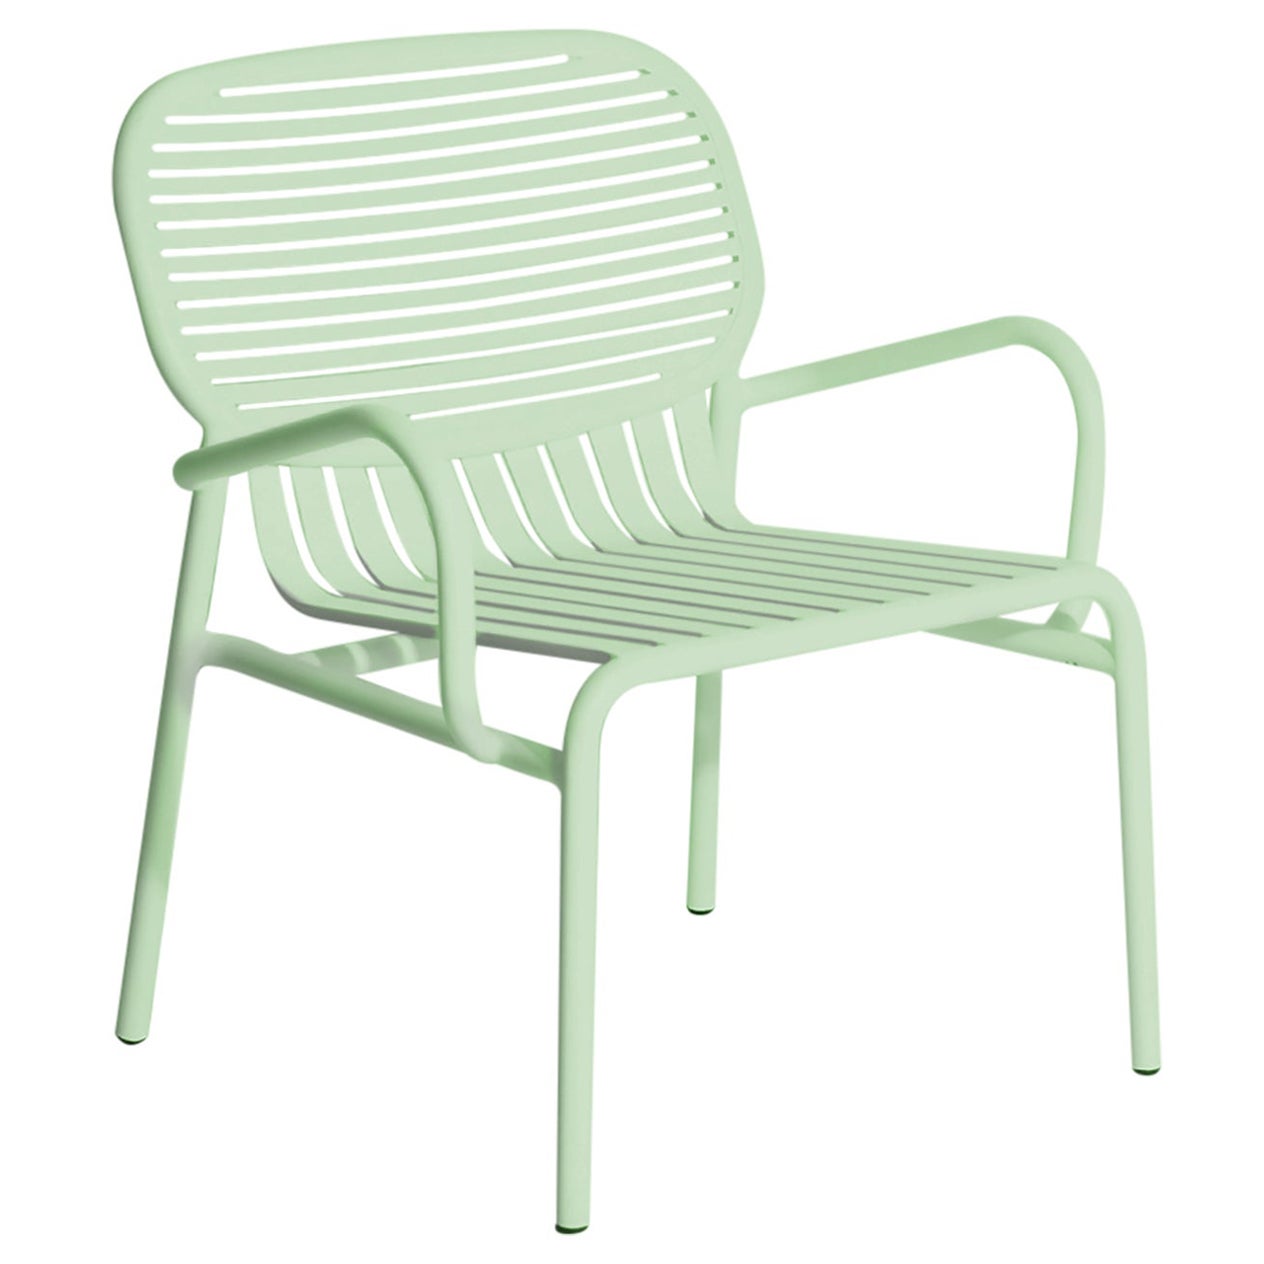 Petite Friture Week-End Armchair in Pastel Green Aluminium, 2017 For Sale